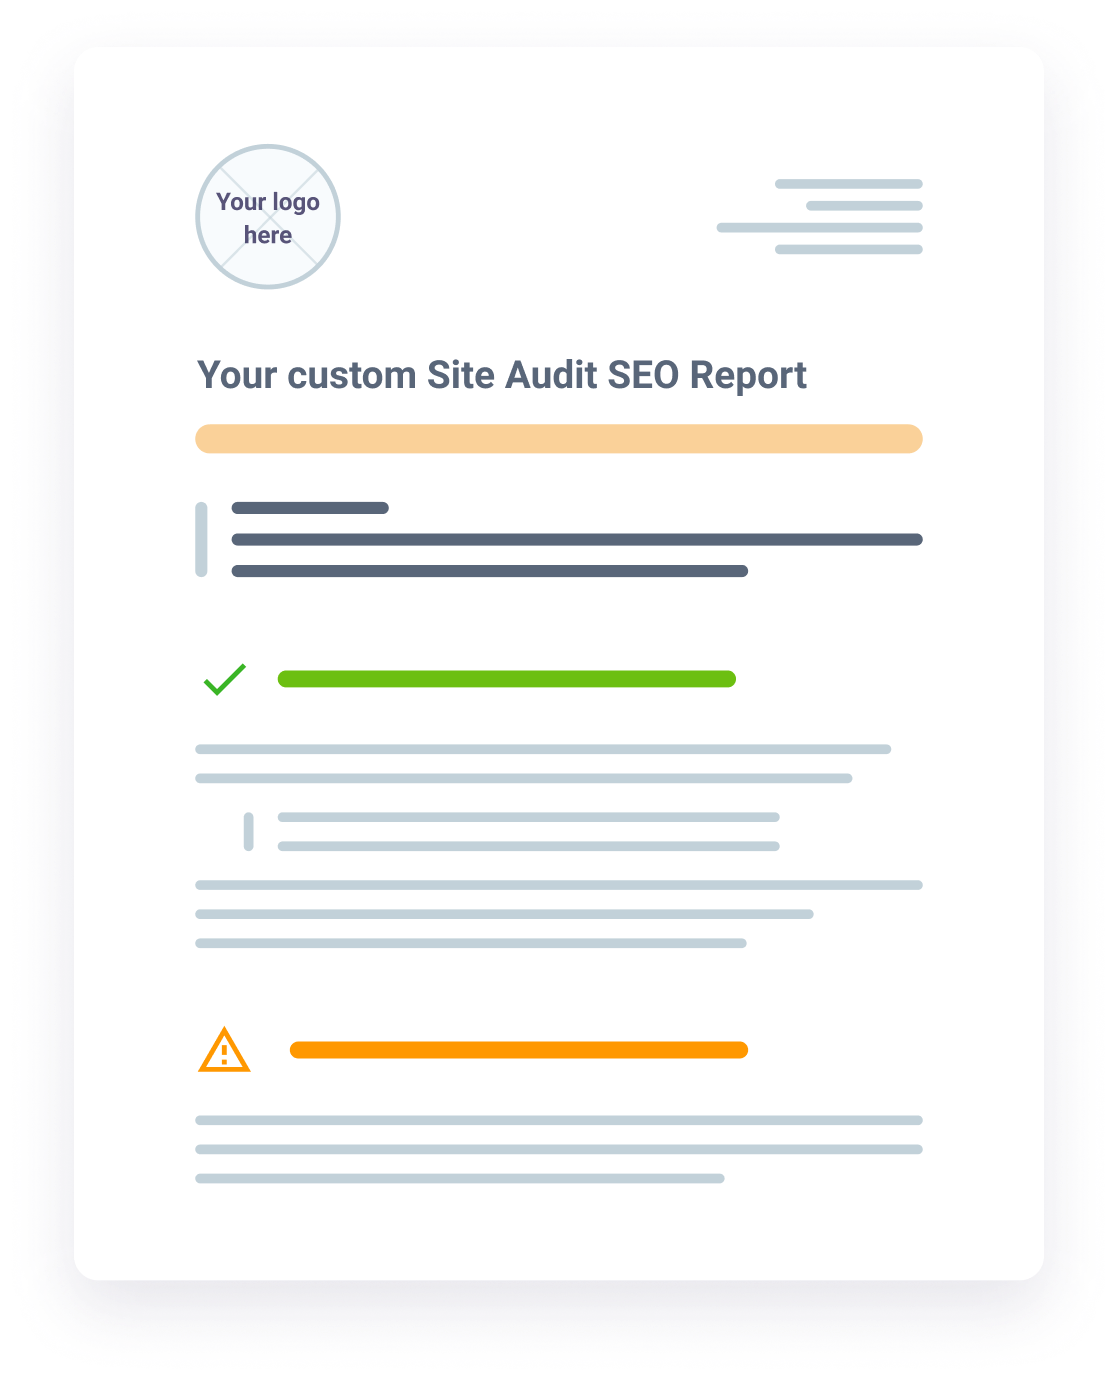 Easily create White Label SEO Report for your clients